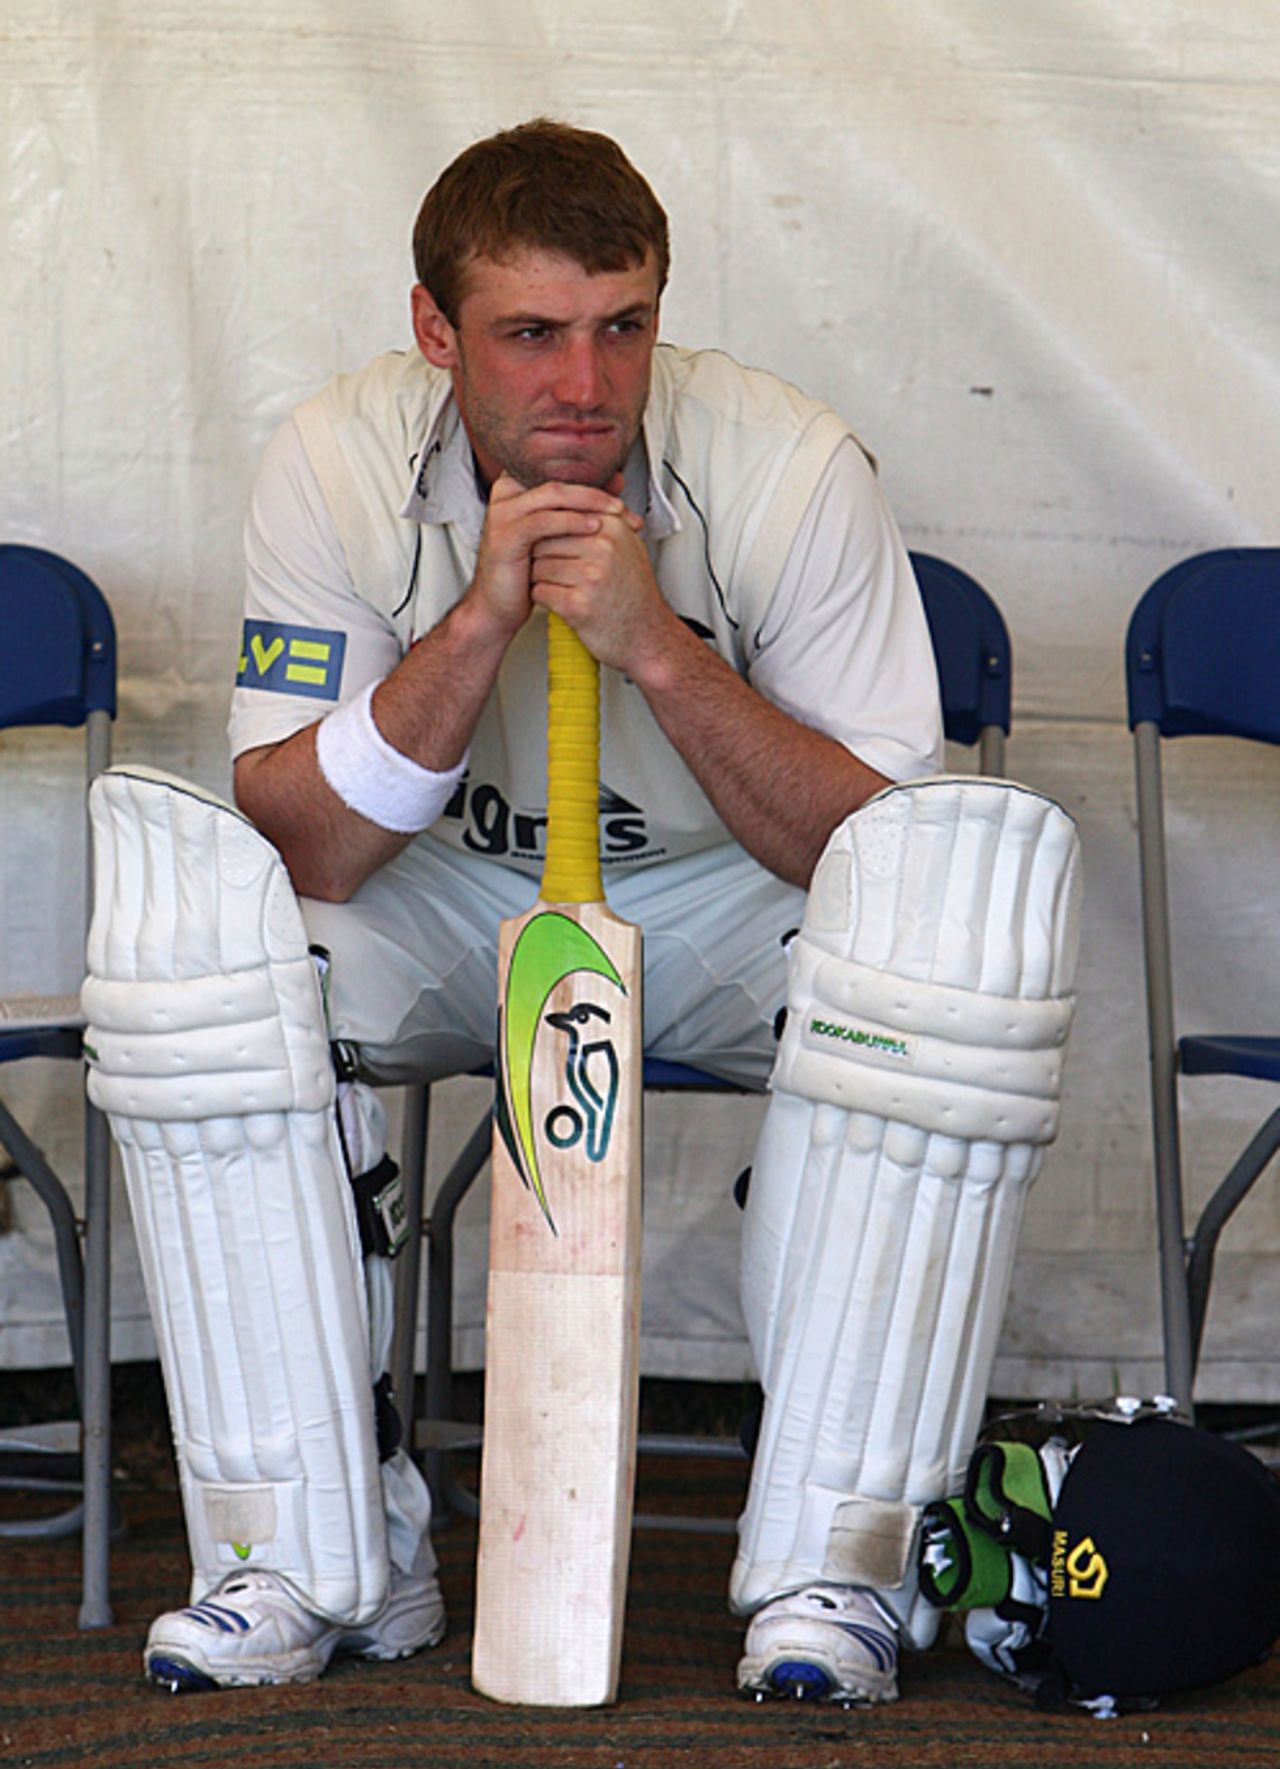 Phillip Hughes, unbeaten on 99 overnight, waits for play to start on the second day, Middlesex v Leicestershire, County Championship, Southgate, April 29, 2009